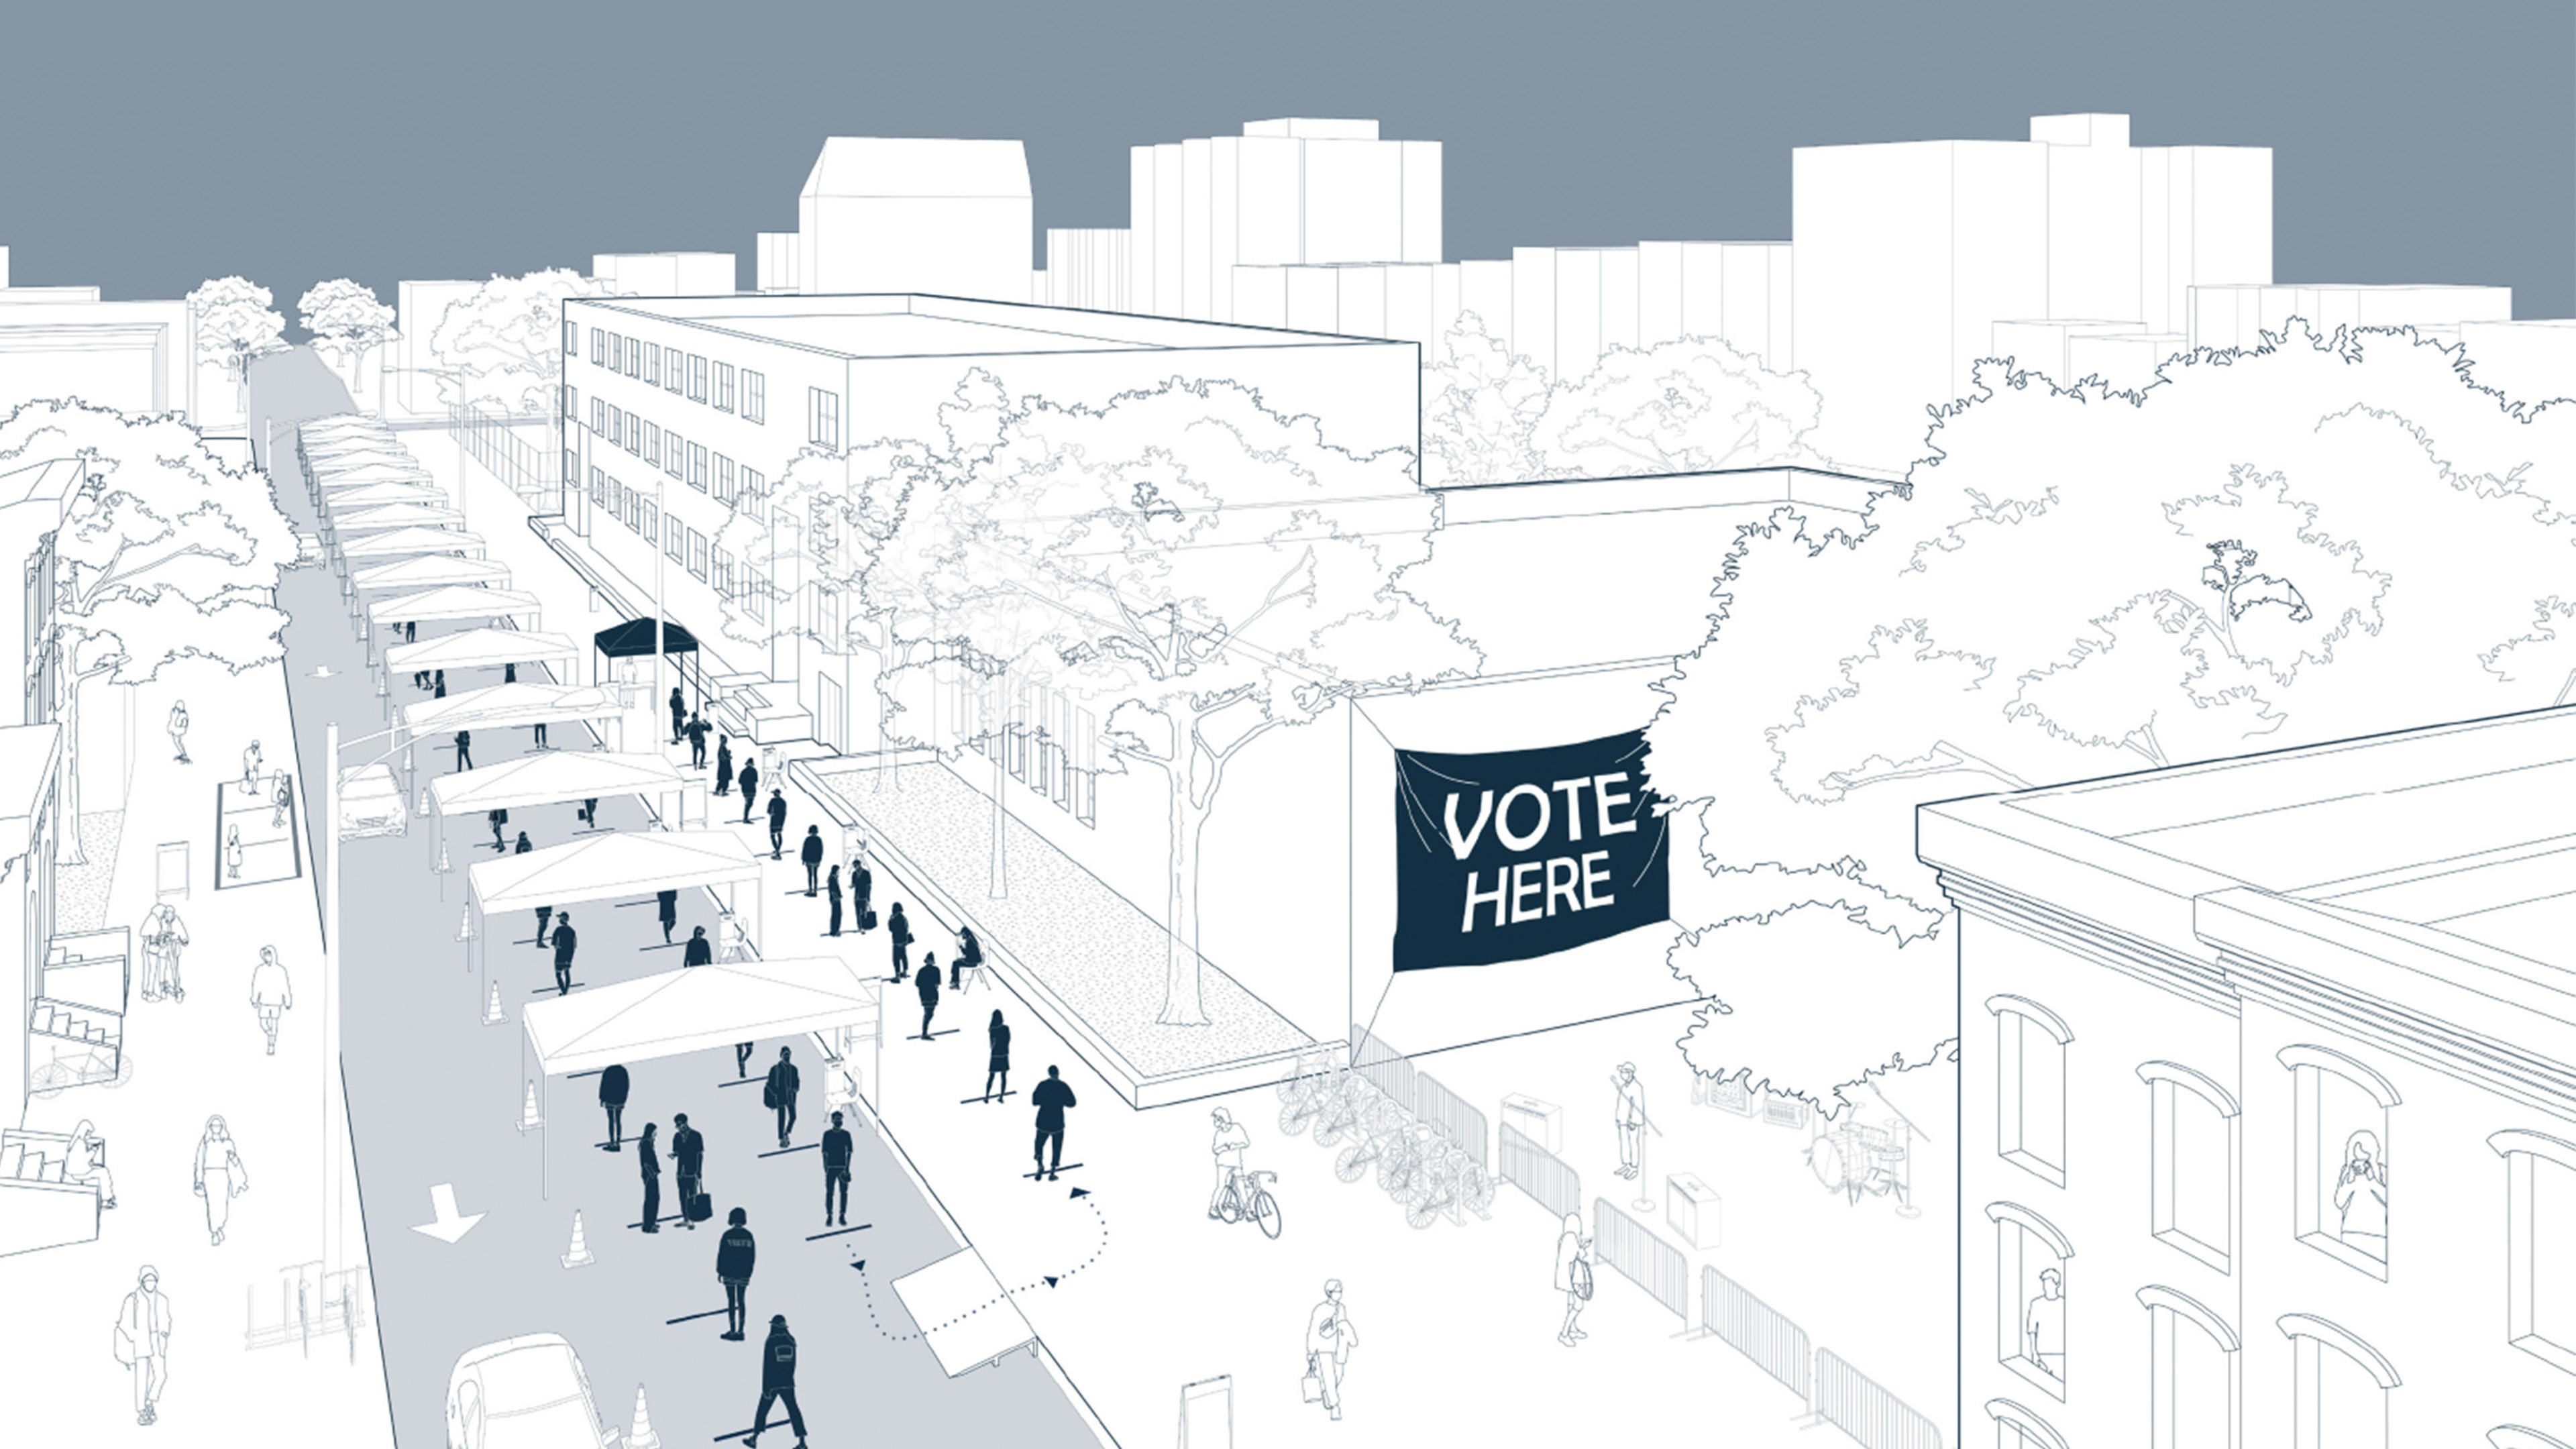 A simple solution to safe pandemic voting: Close streets to let people vote outside